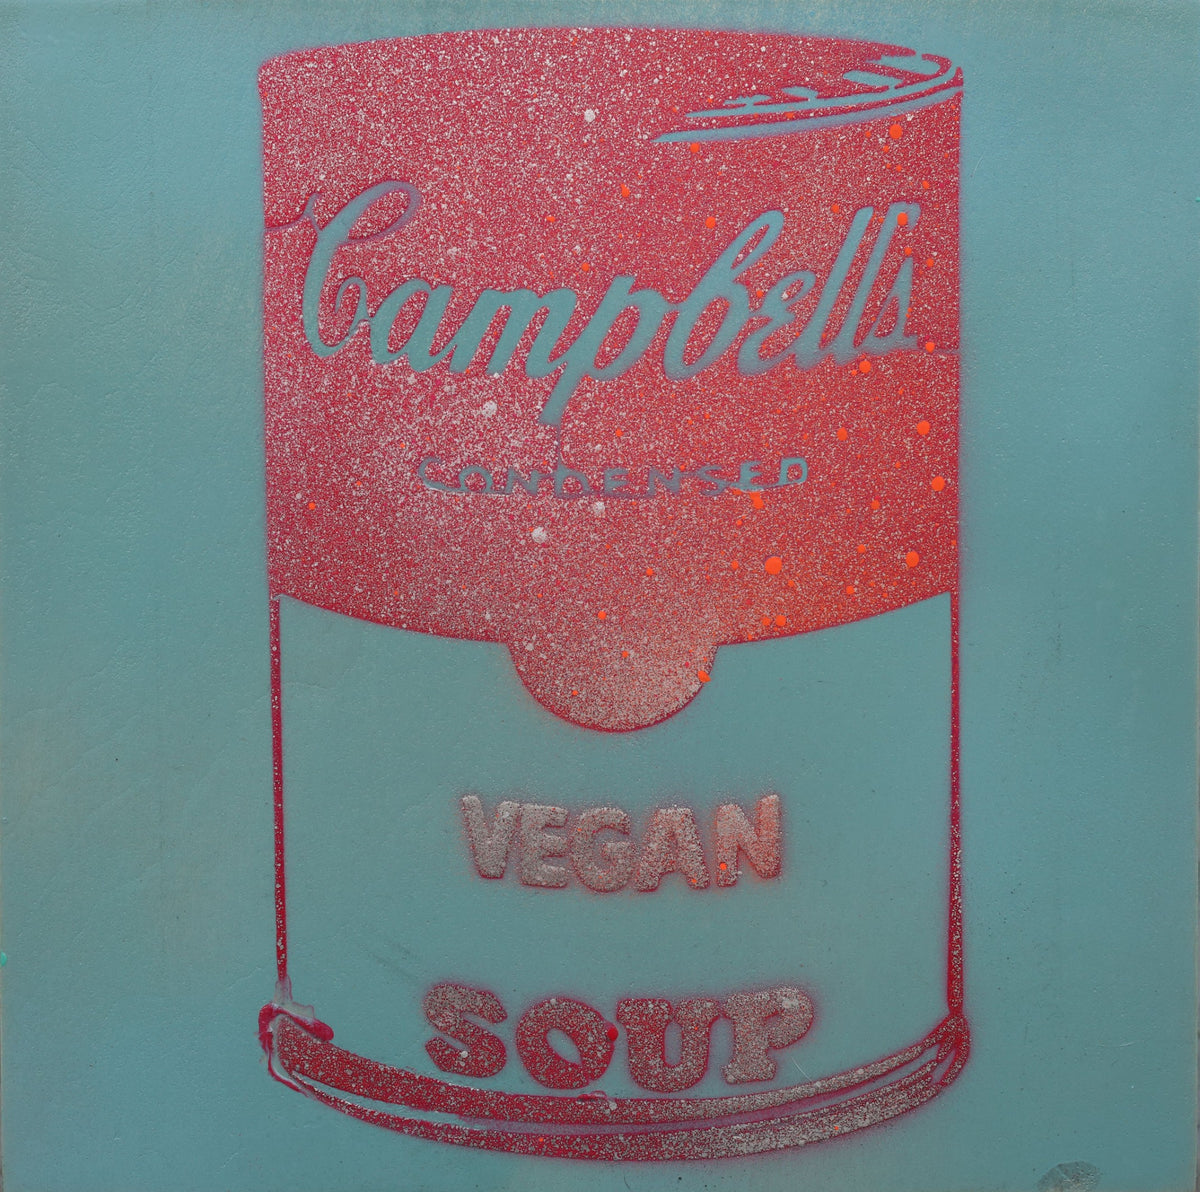 Vegan Soup Sky Blue & Red Graffiti on Wood and Resin 8x8